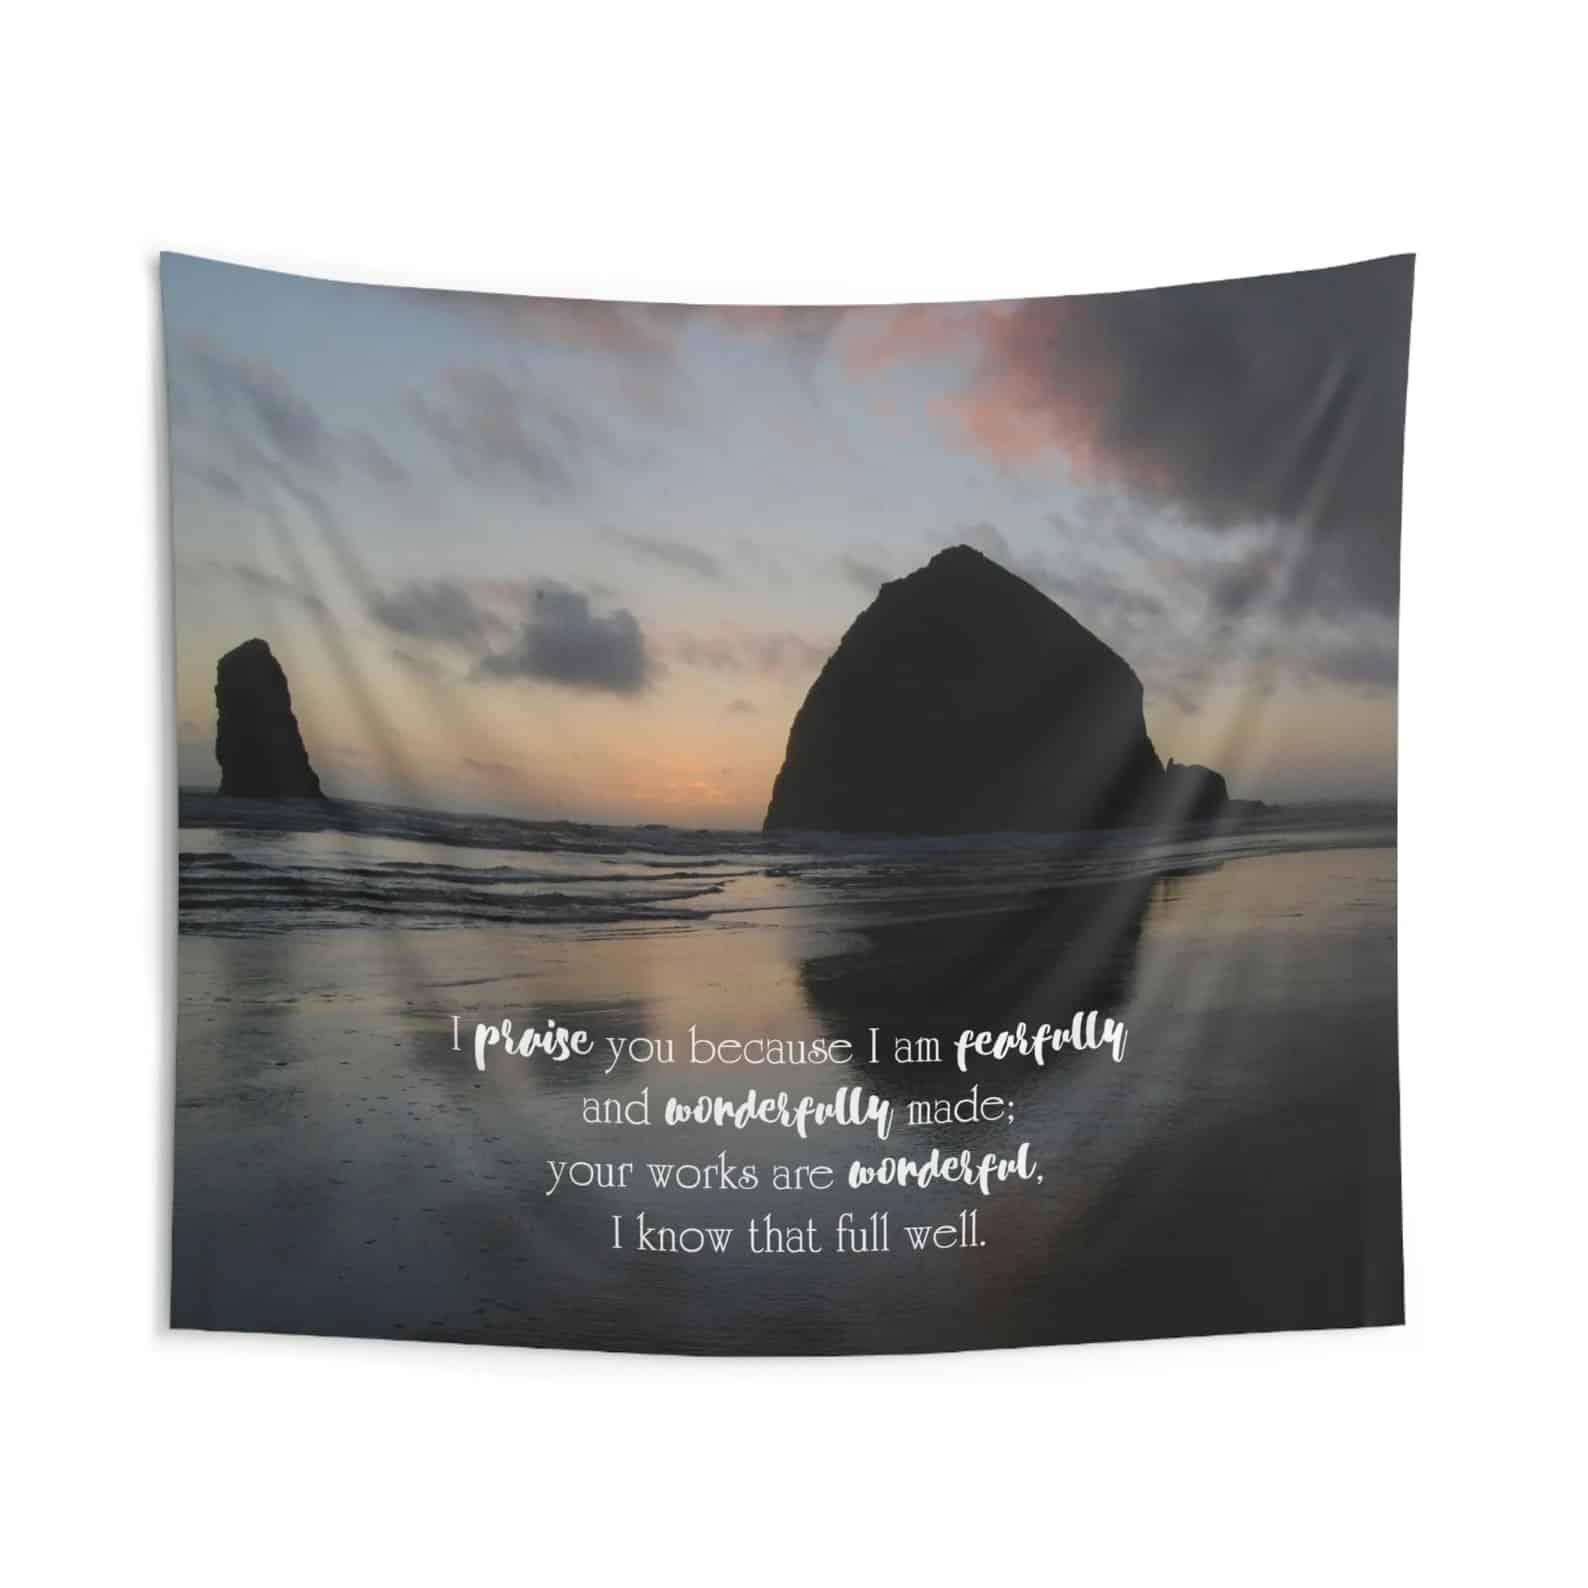 Cannon Beach Psalms Wall Tapestry